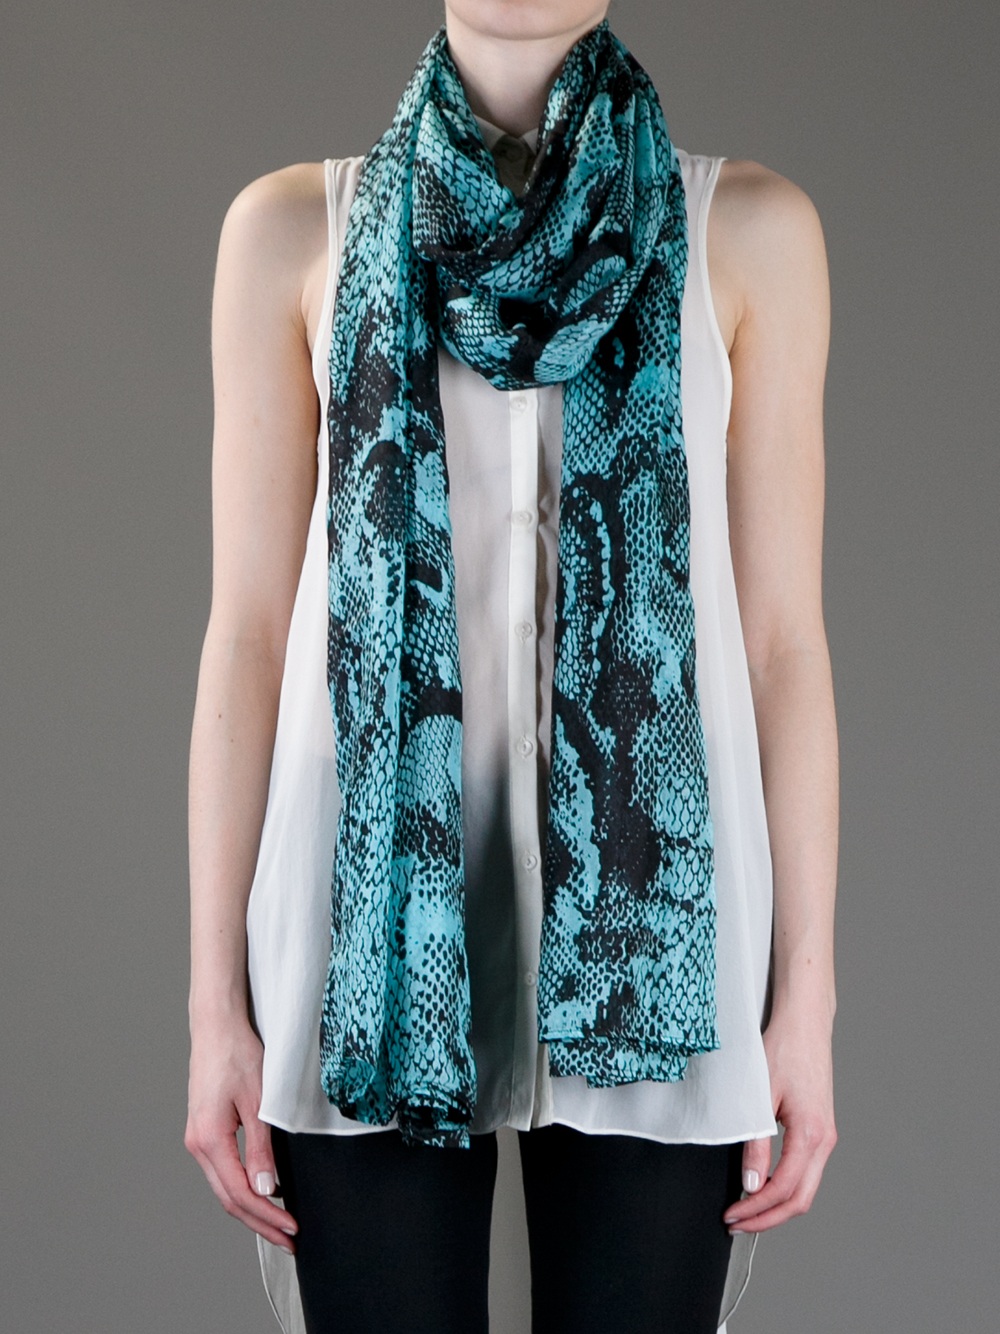 Lyst - Lily And Lionel Python Scarf in Blue